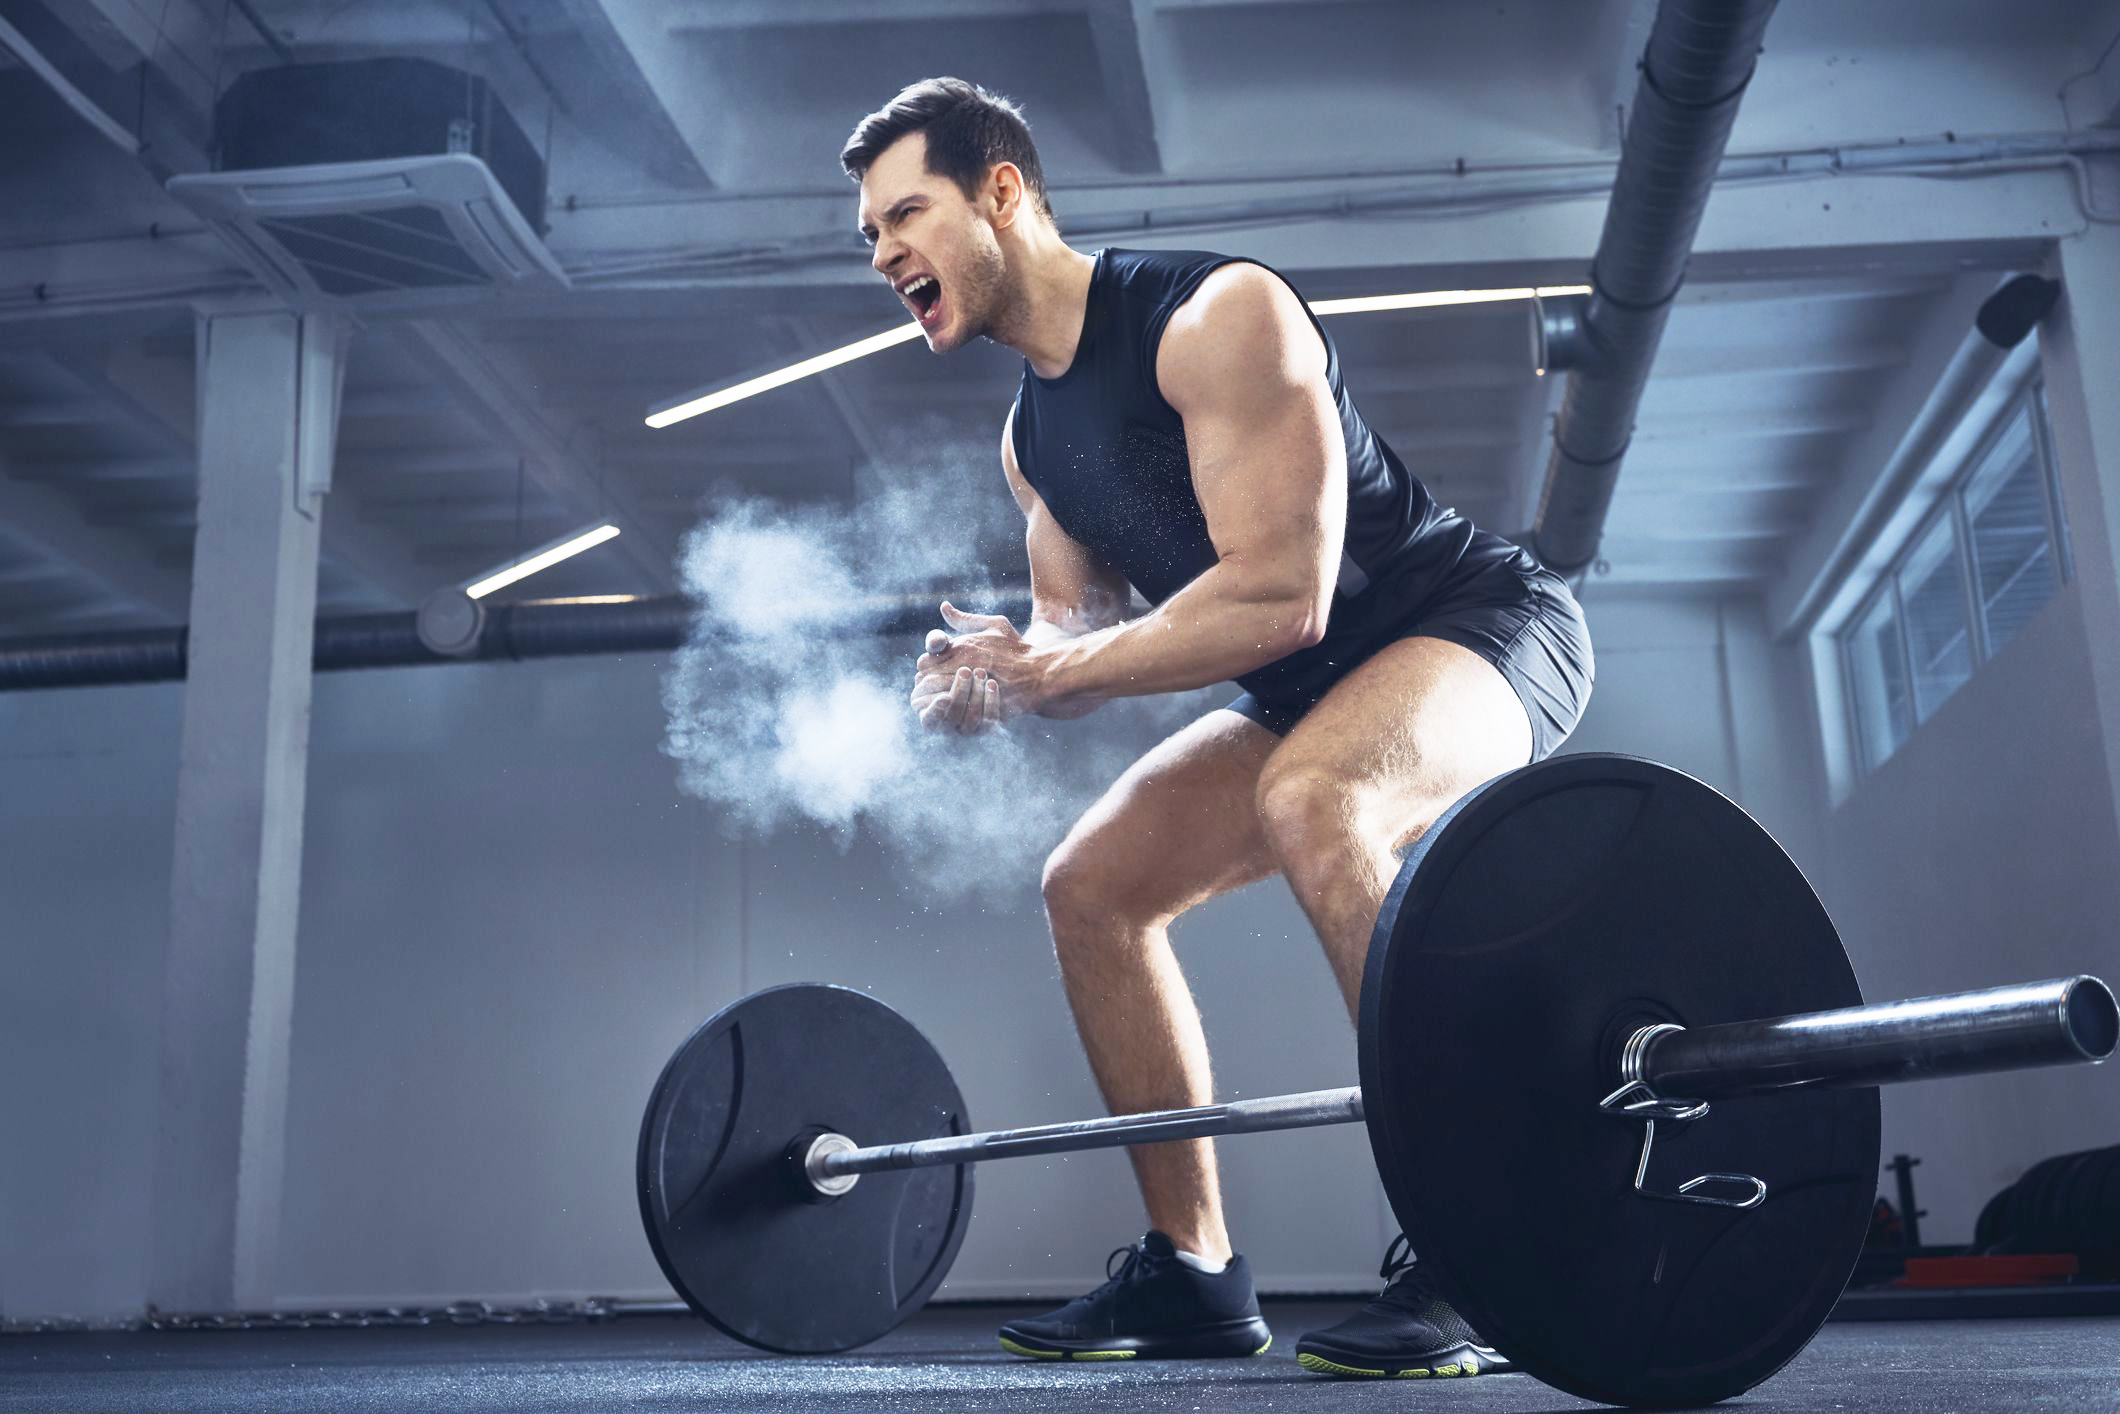 The Reason Weightlifters Use Smelling Salts Before Big Lifts